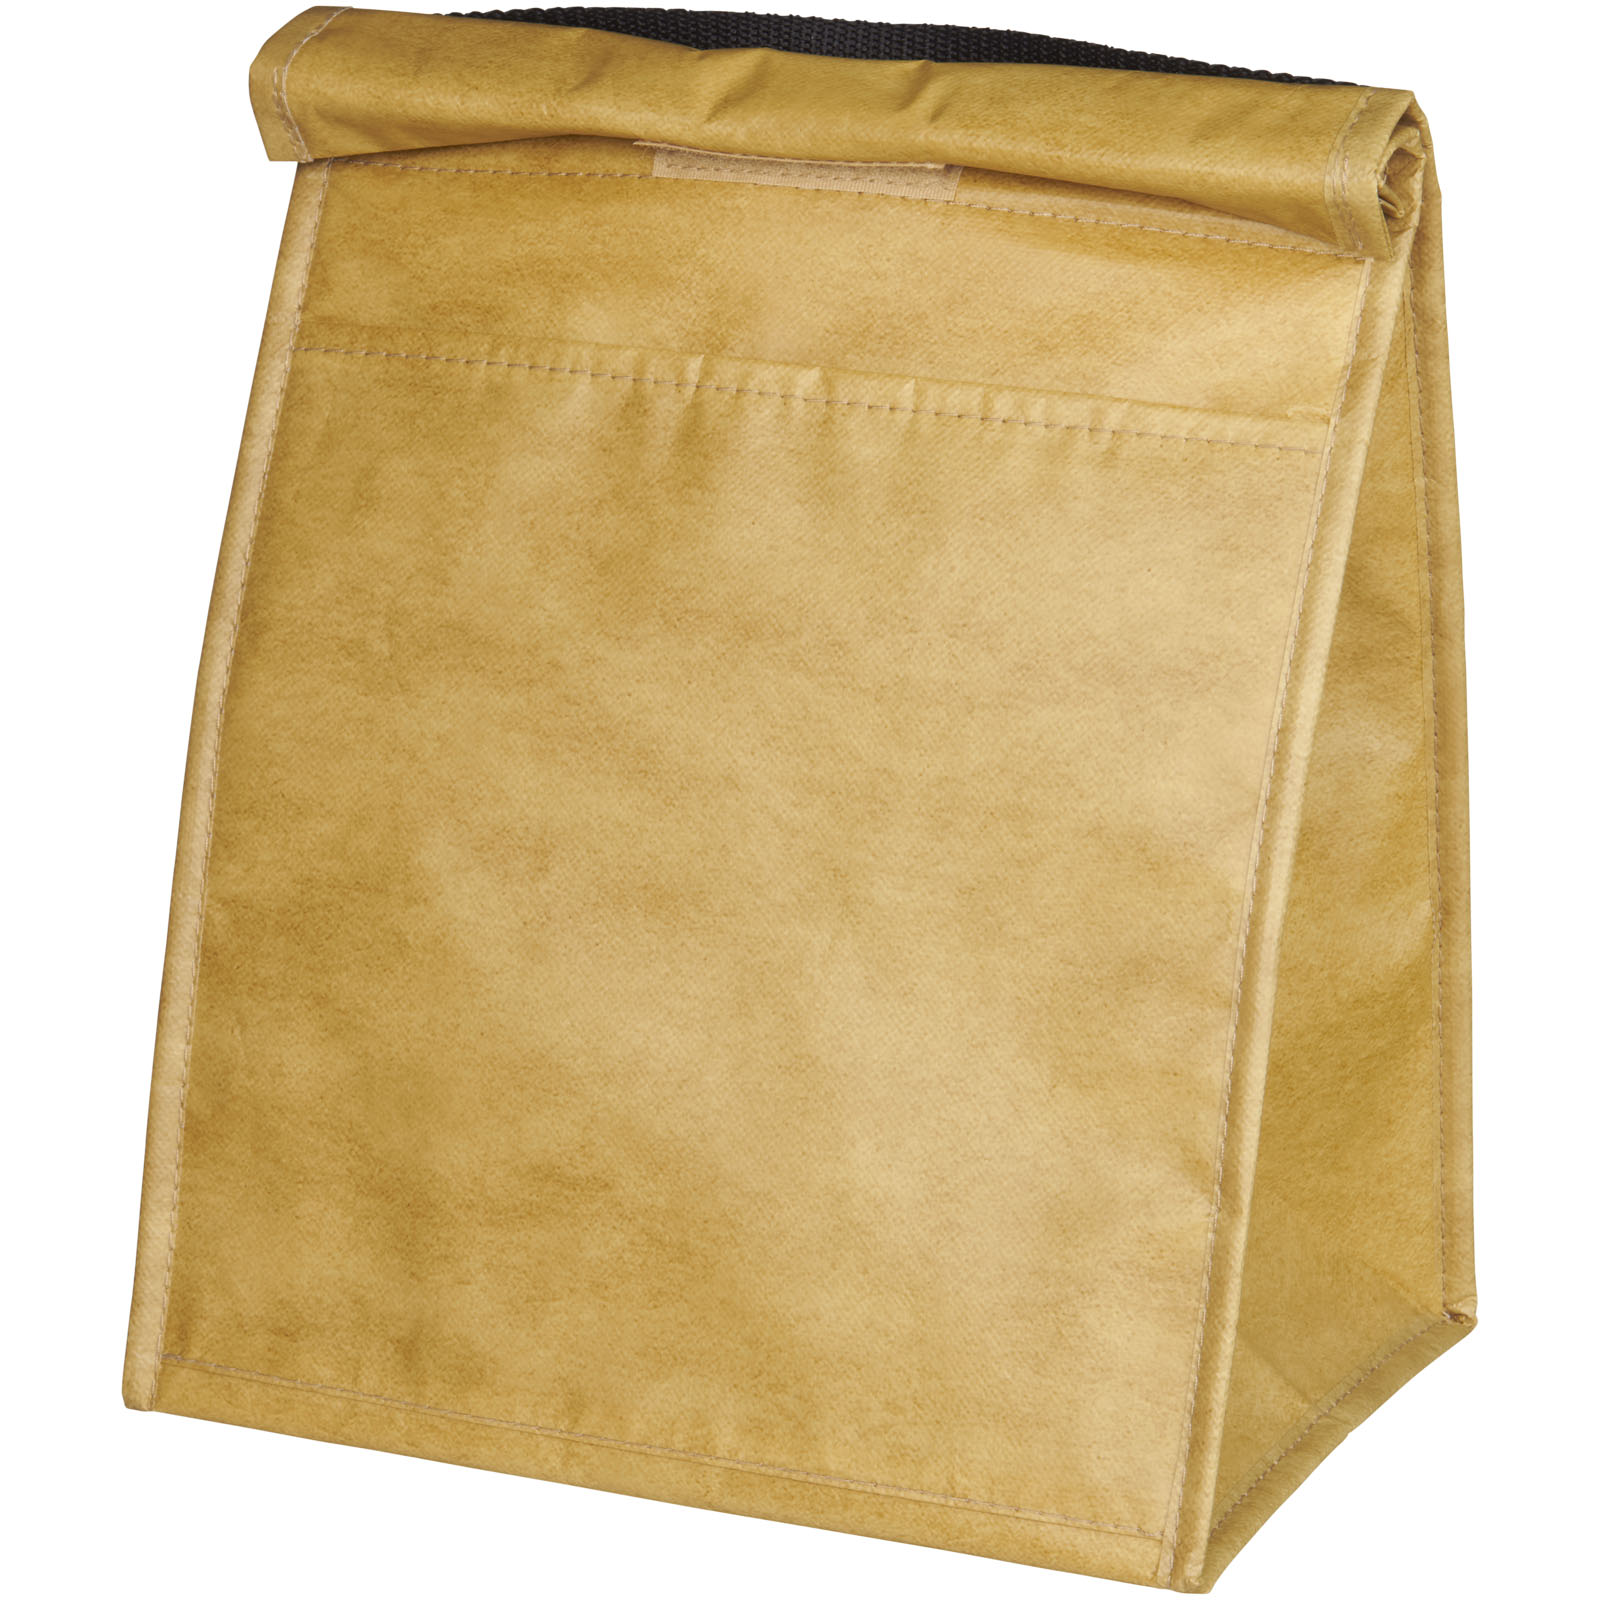 Sacs isothermes - Grand sac isotherme Papyrus 6L